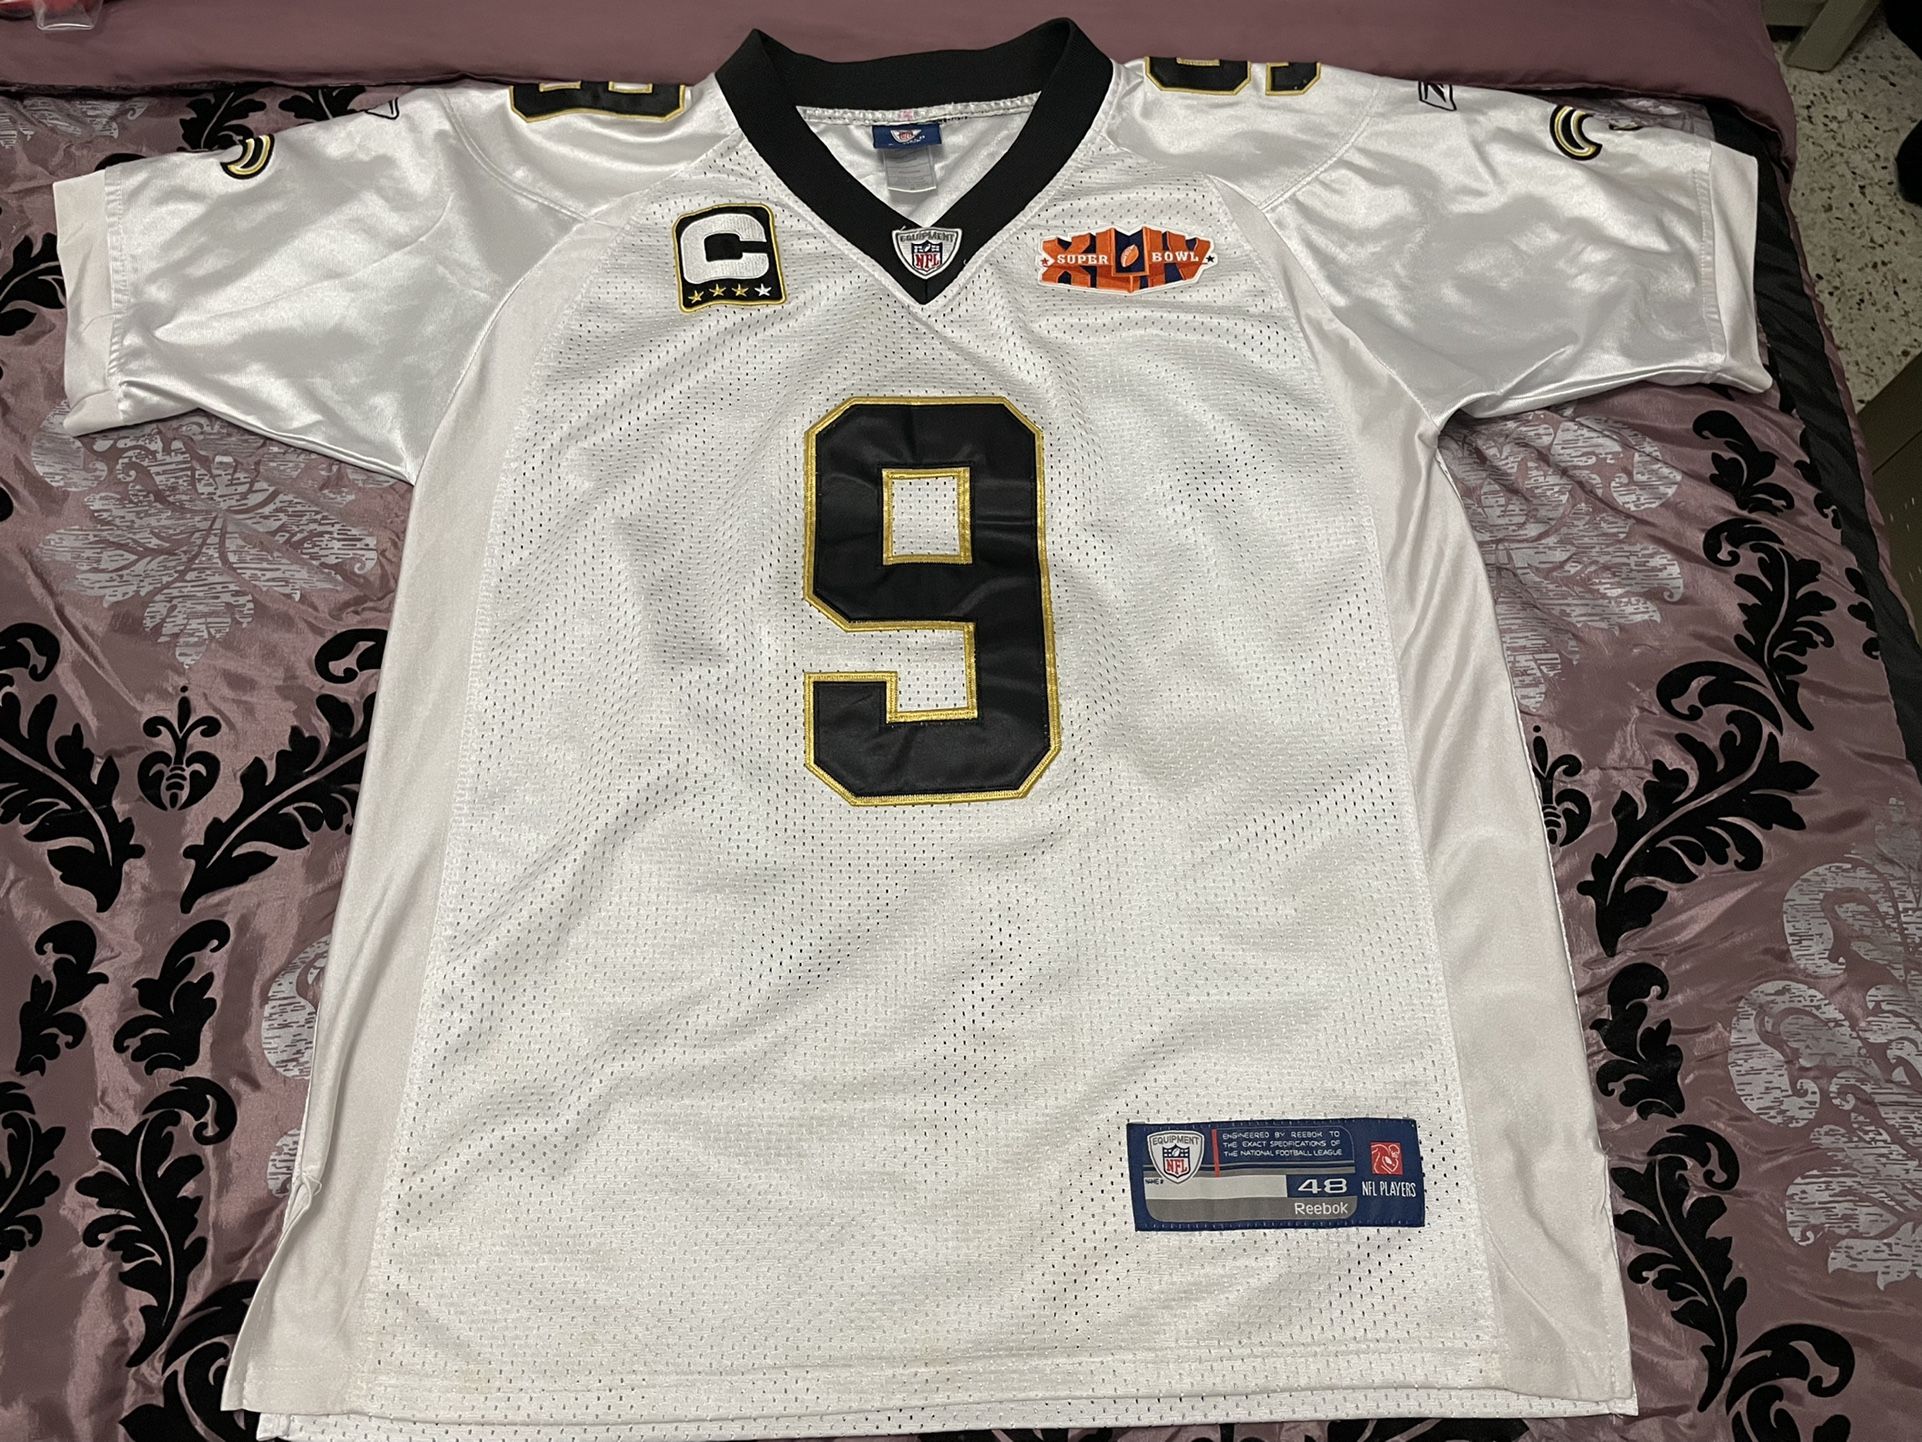 Drew Brees Authentic Superbowl Jersey